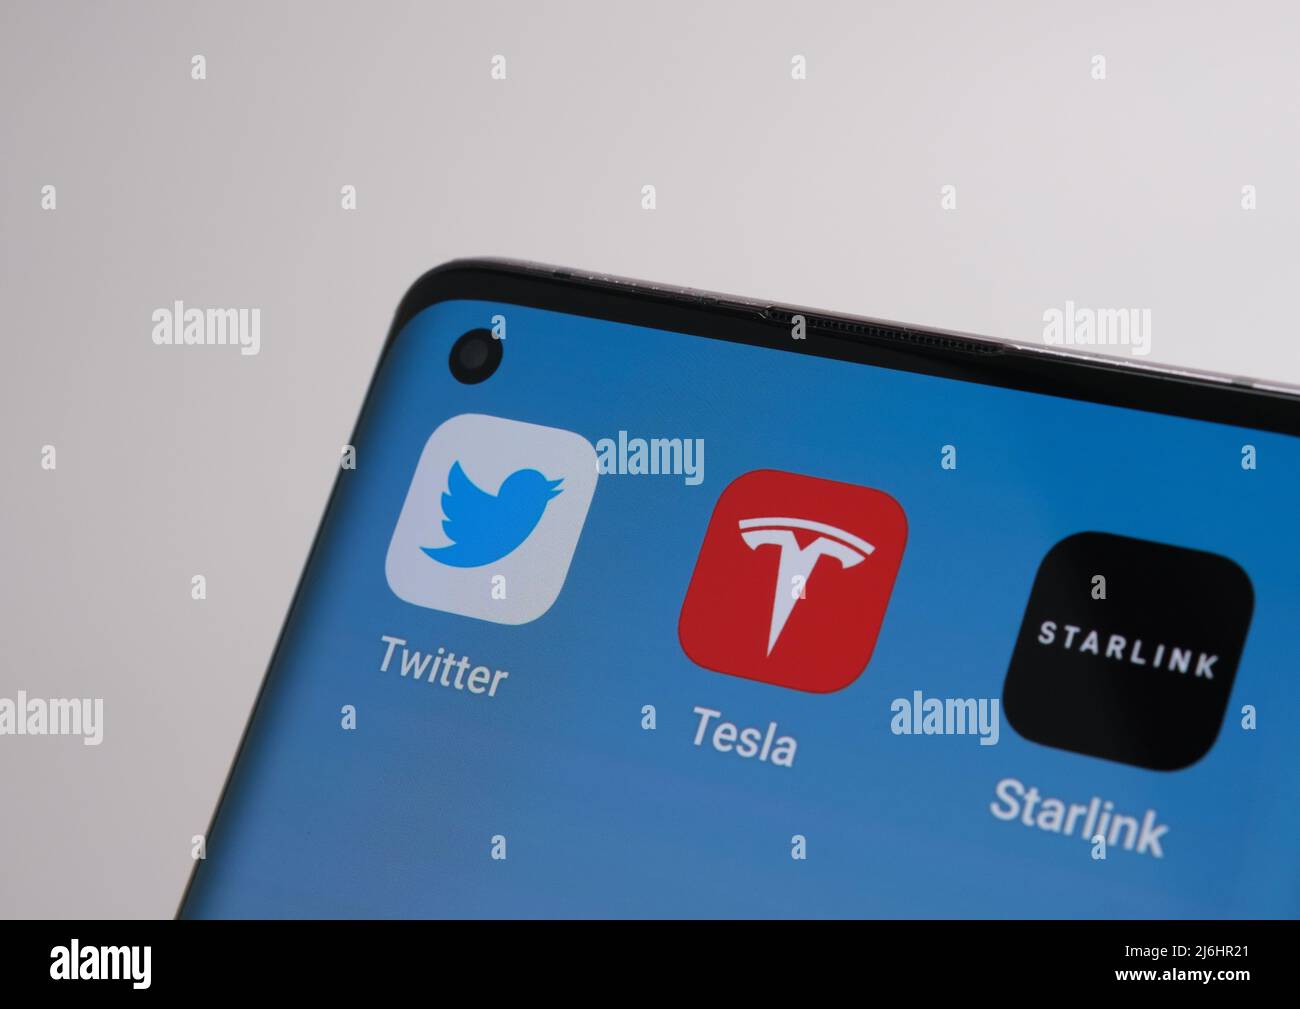 The smartphone with Twitter, Tesla and Starlink apps. Concept for Elon Musk asset ownewship. Stafford, United Kingdom, May 2, 2022 Stock Photo